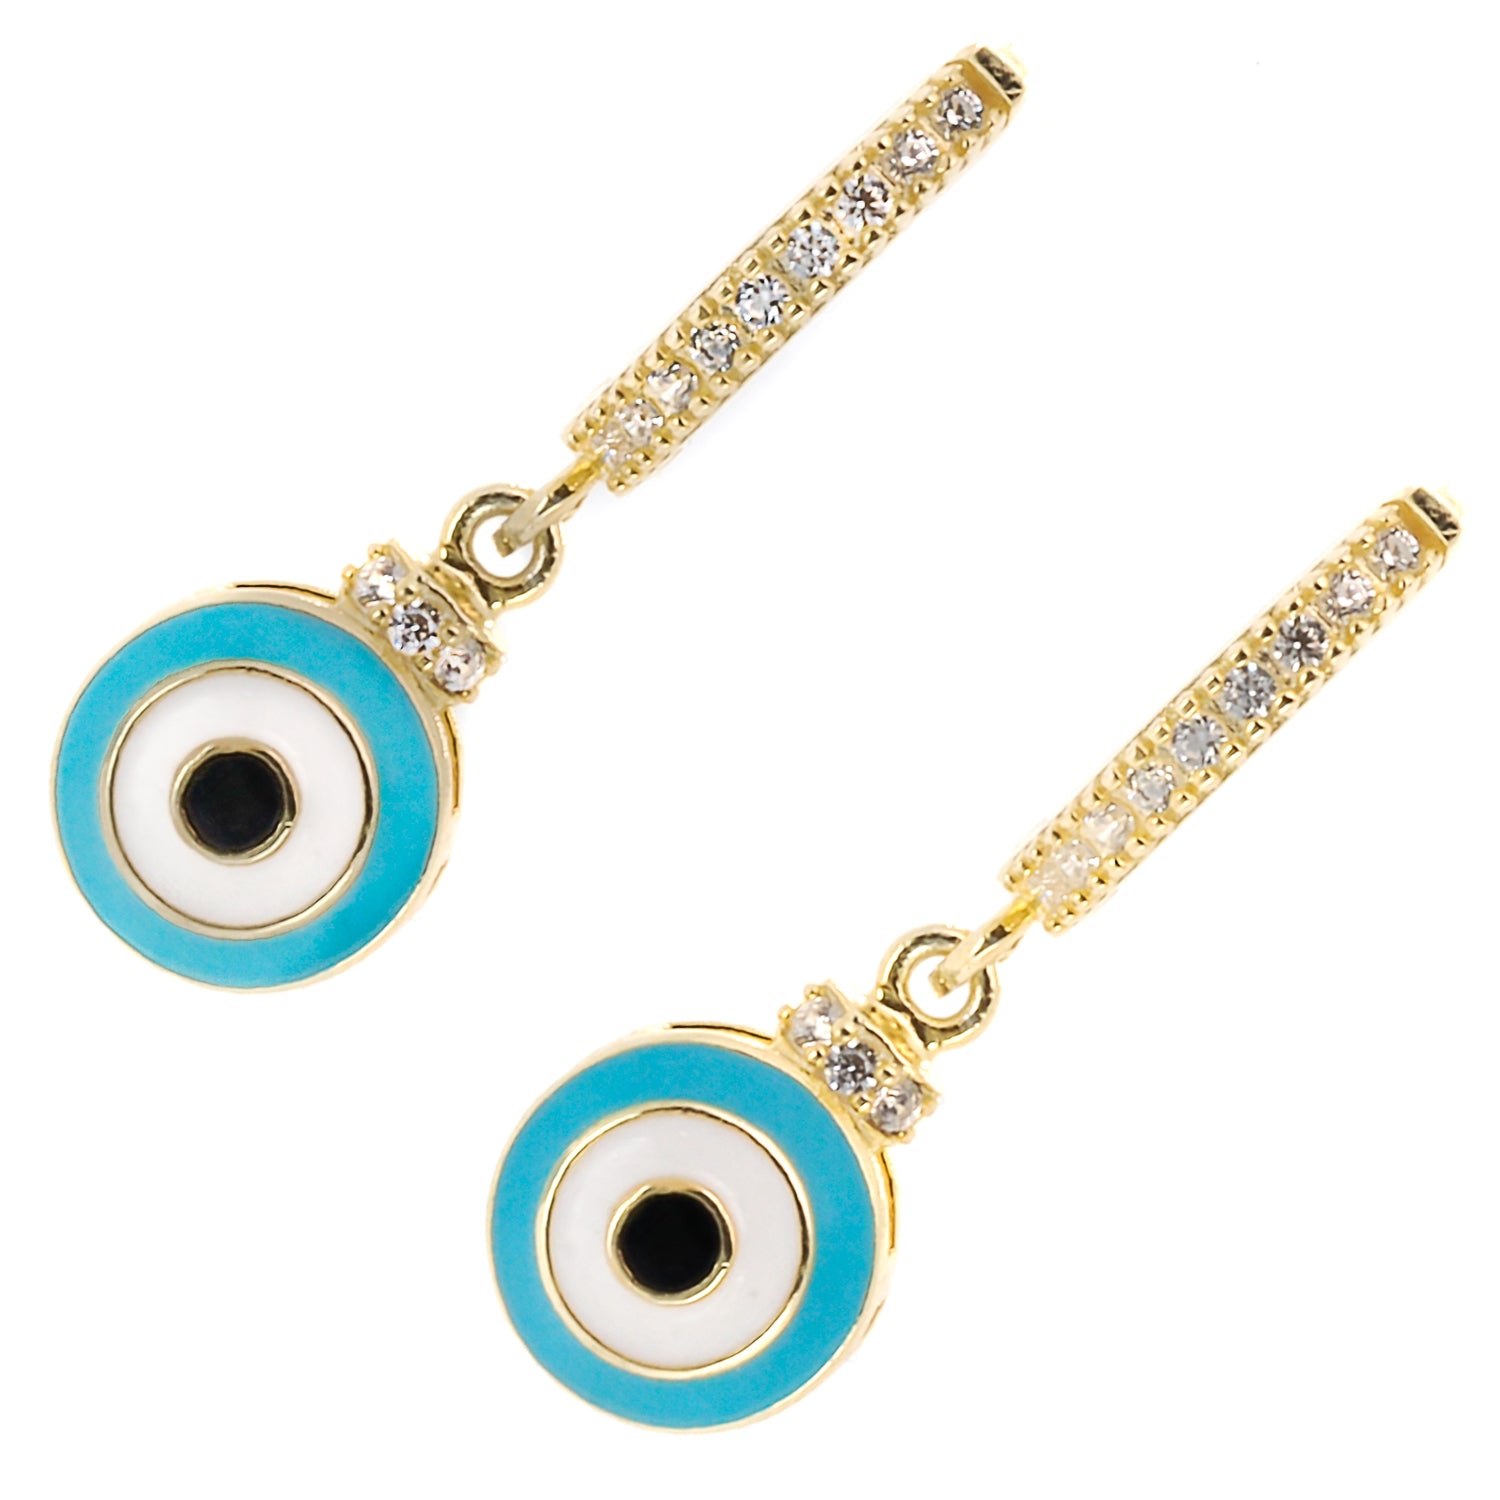 Eye-catching Turquoise Evil Eye Gold Earrings with intricate details